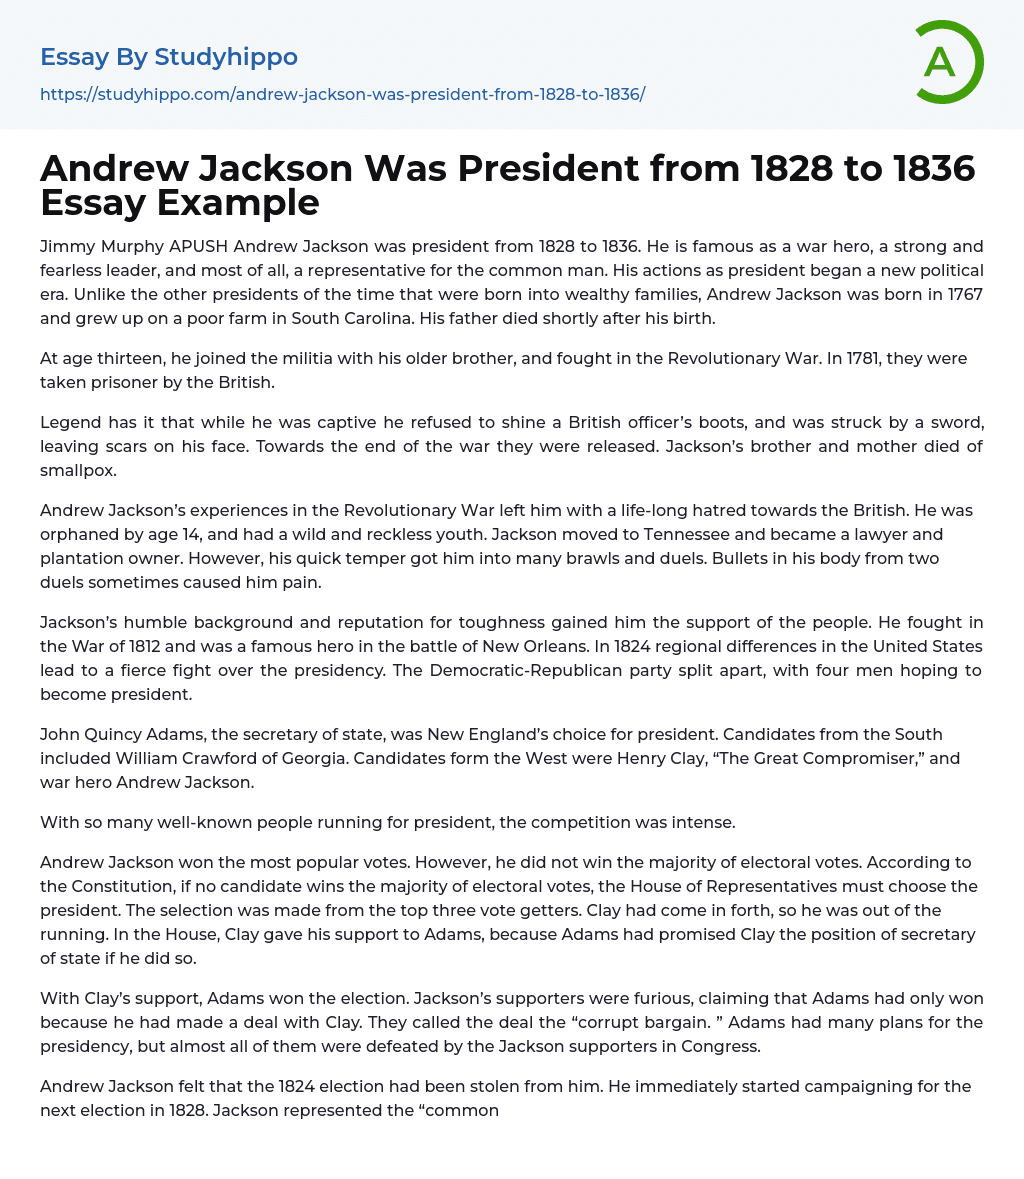 Andrew Jackson Was President from 1828 to 1836 Essay Example